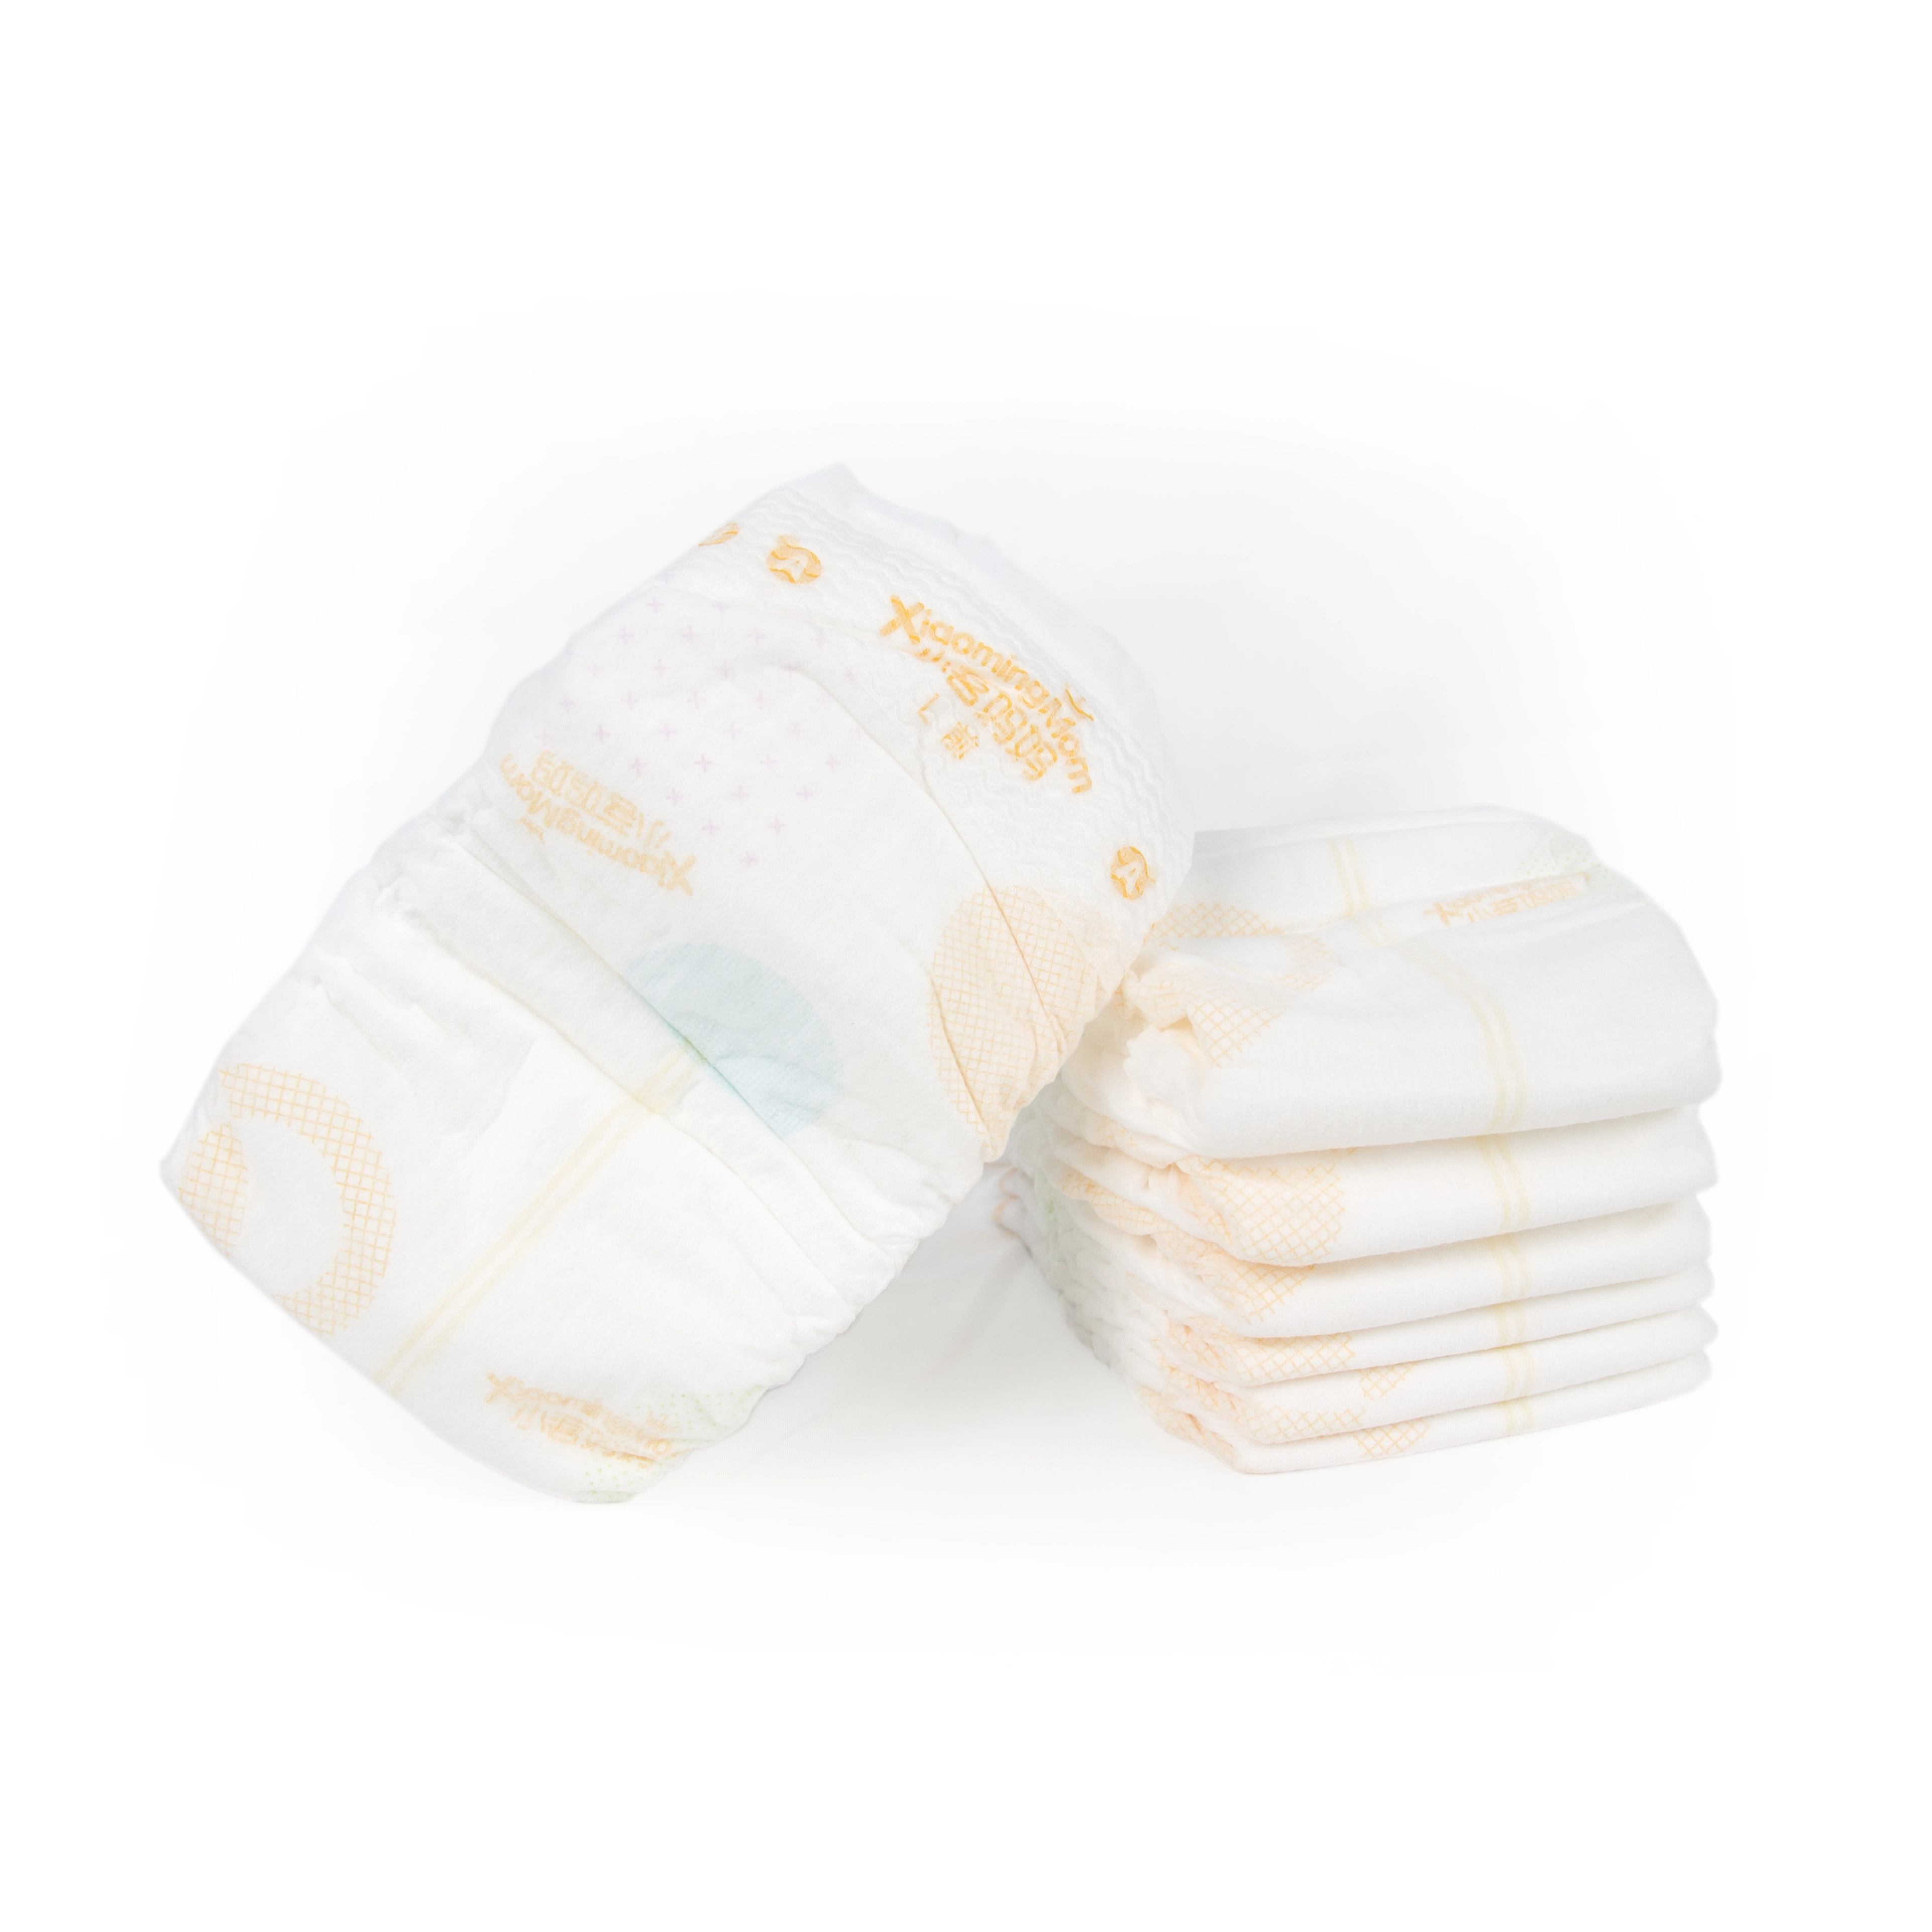 Diapers Disposable Baby Super-Dry Little Angle Bamboo Diaper Organic Biodegradable Leak Guard Baby Diaper